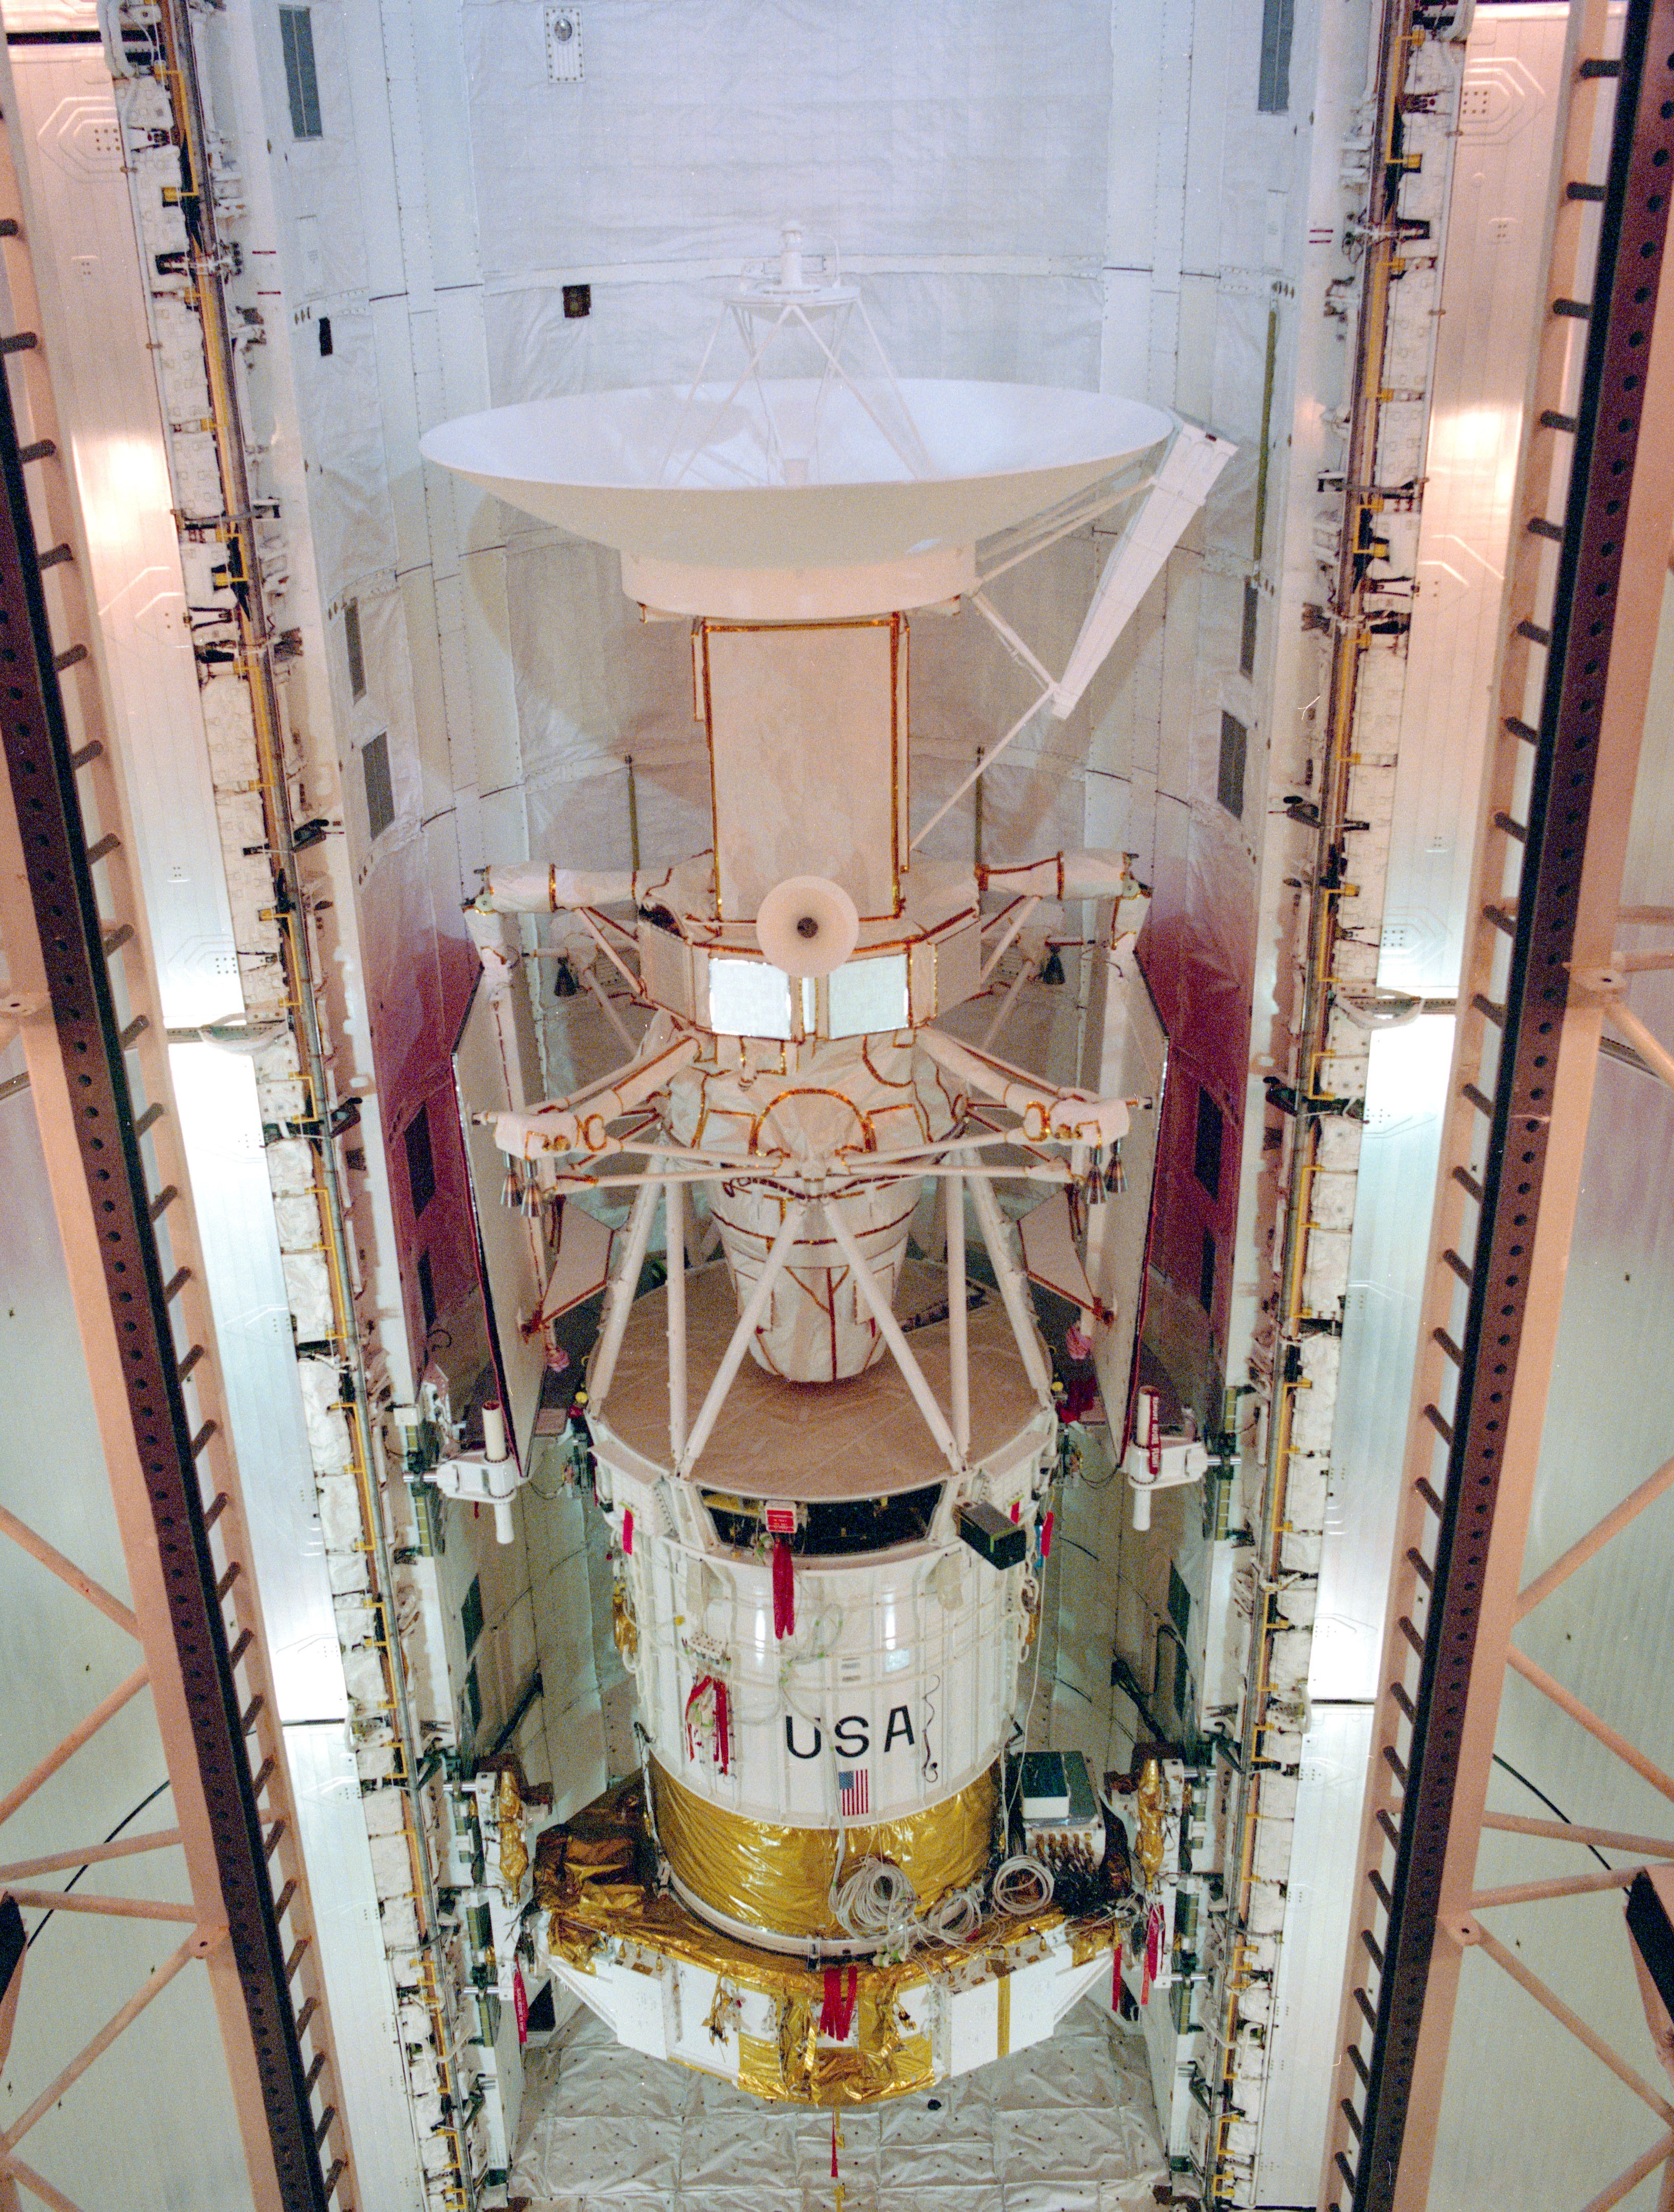 The Magellan spacecraft in Atlantis’ payload bay in preparation for STS-30